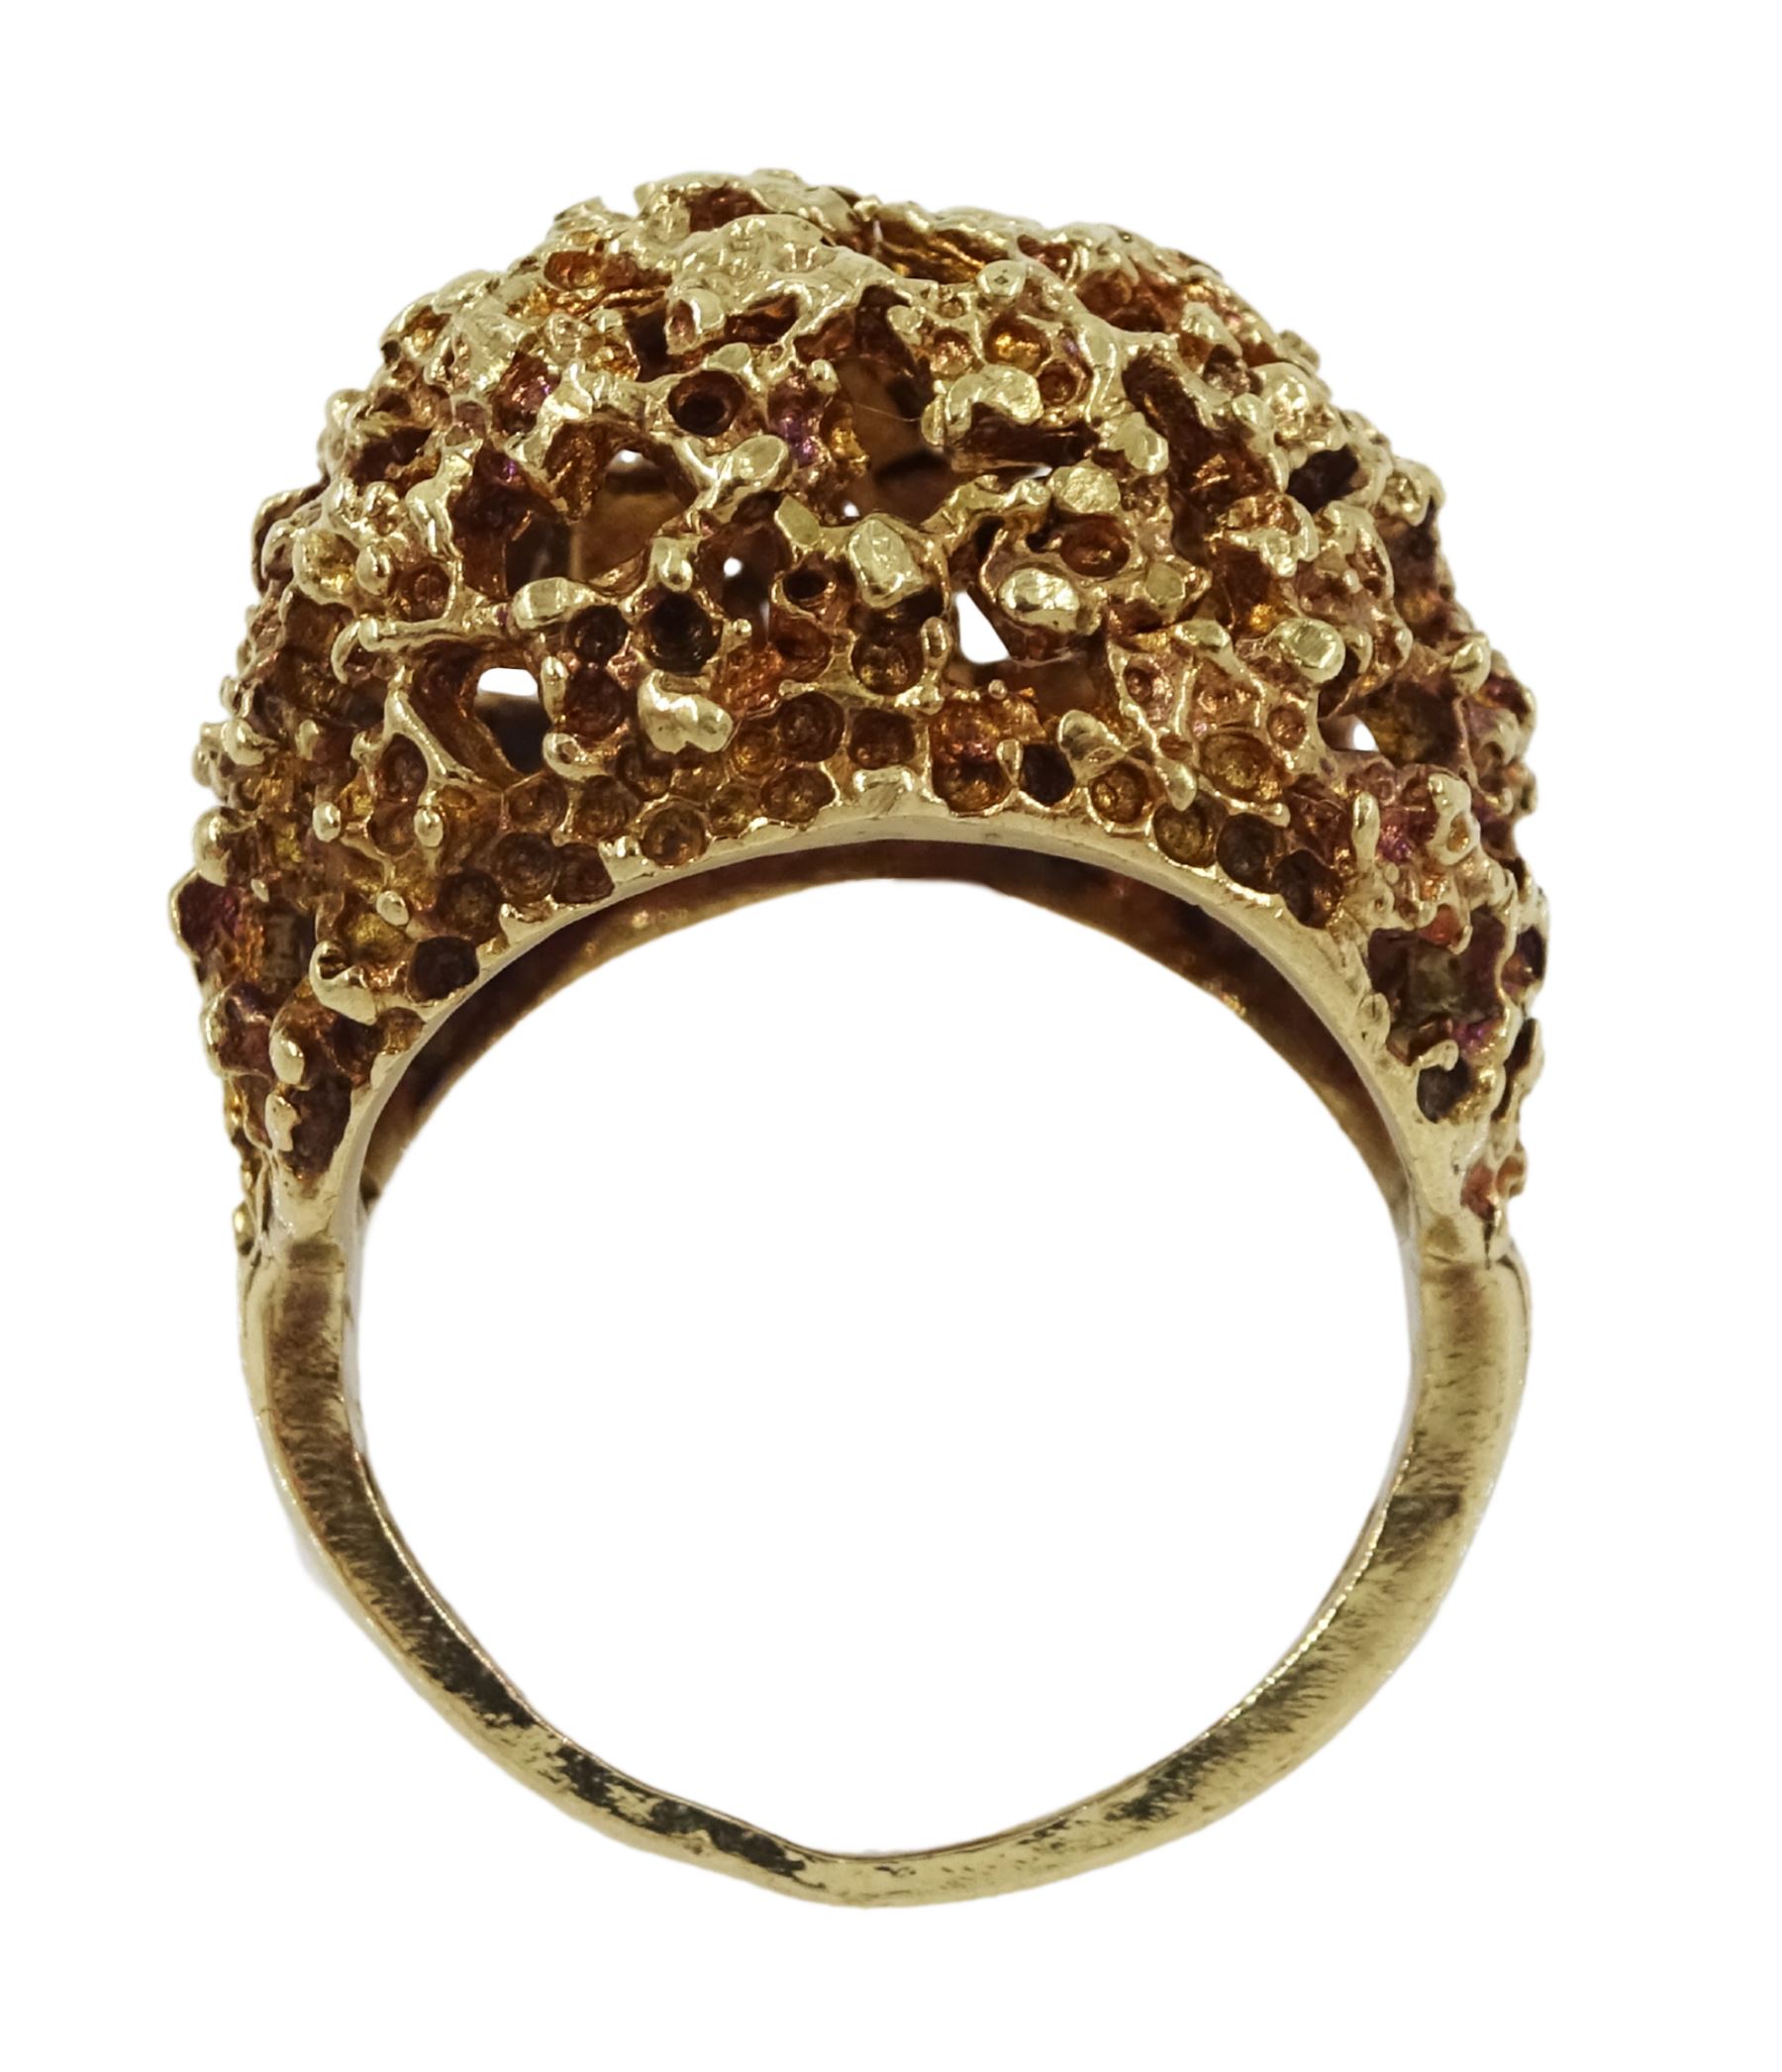 9ct gold textured open work dome shaped ring - Image 4 of 4